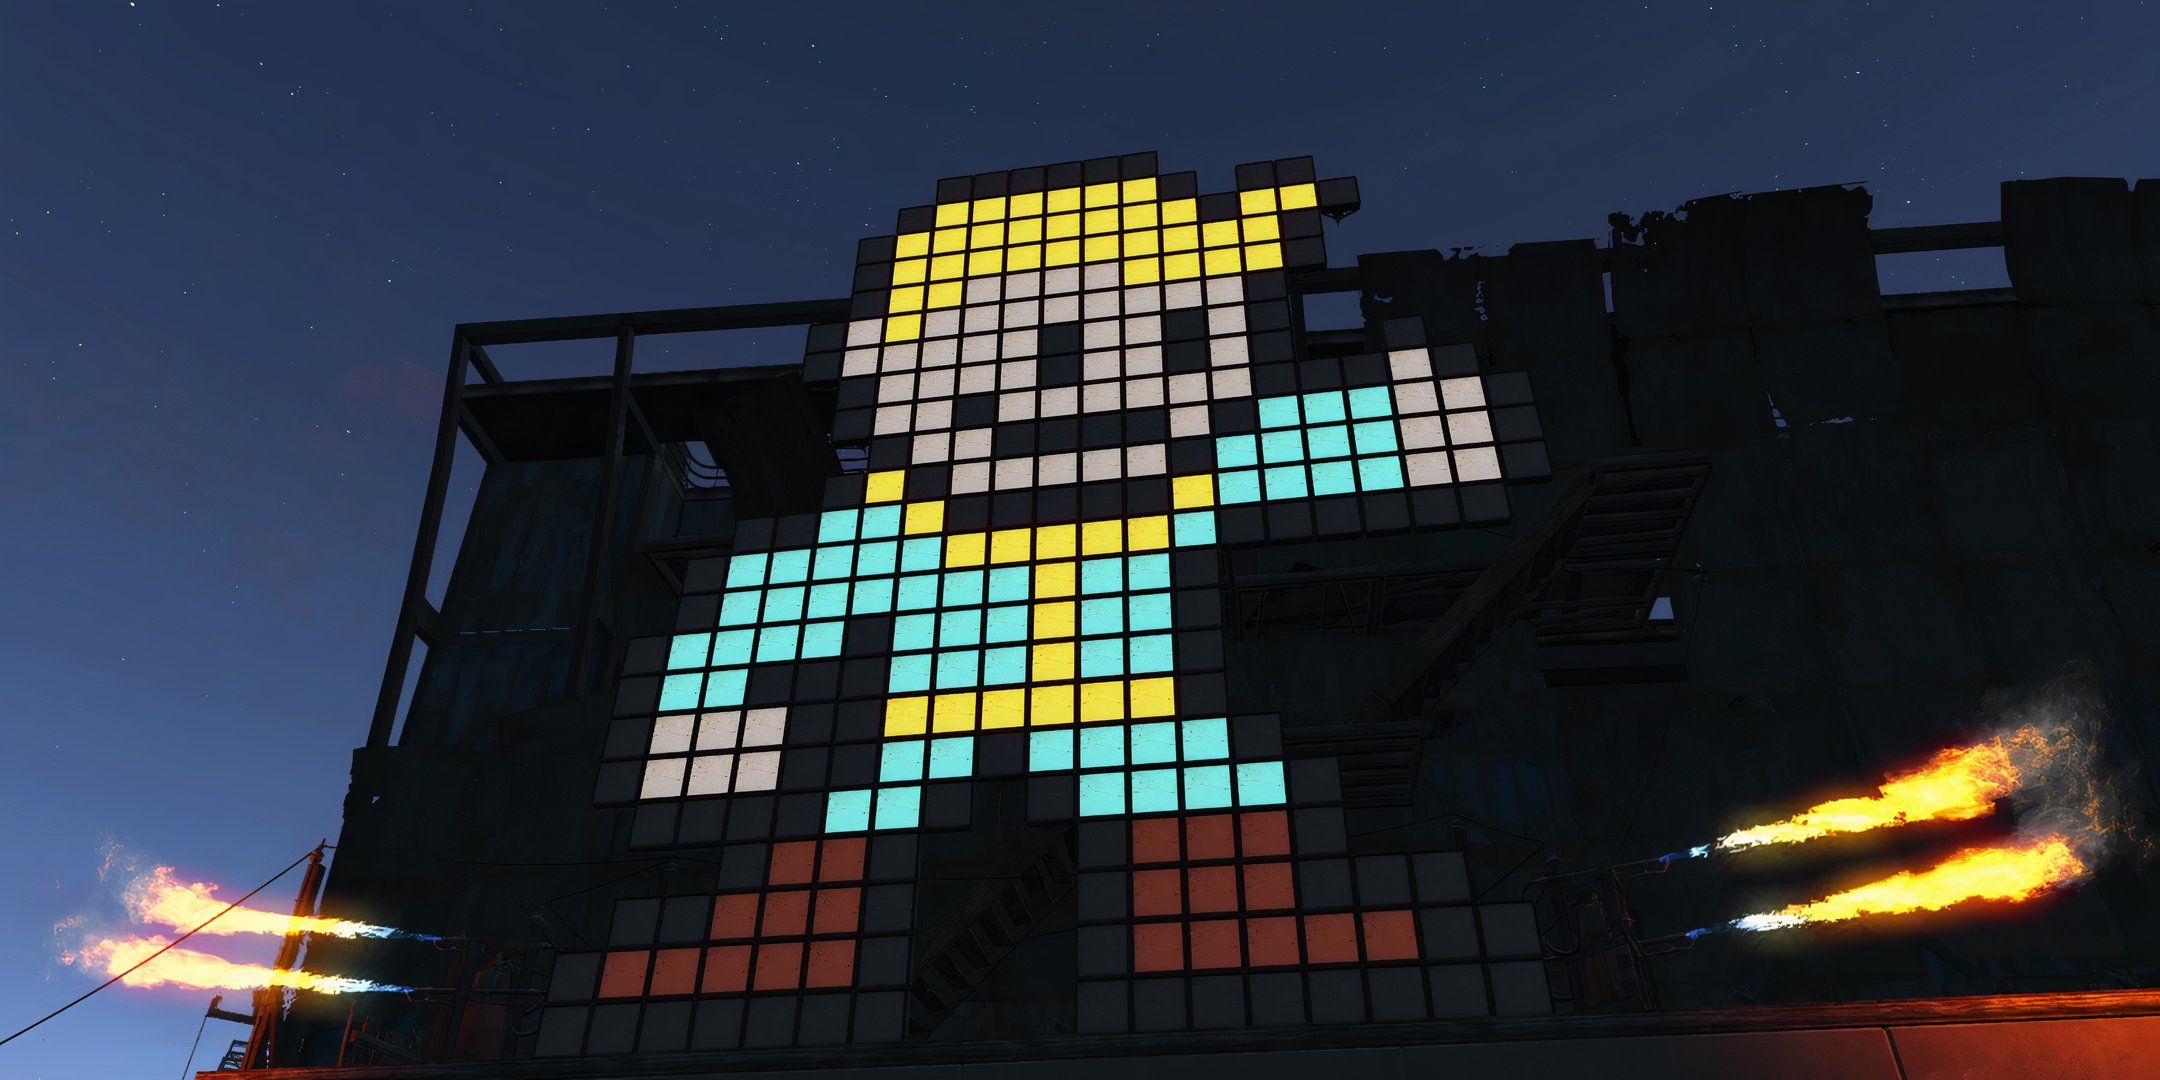 A Vault-Boy building in Fallout 4.